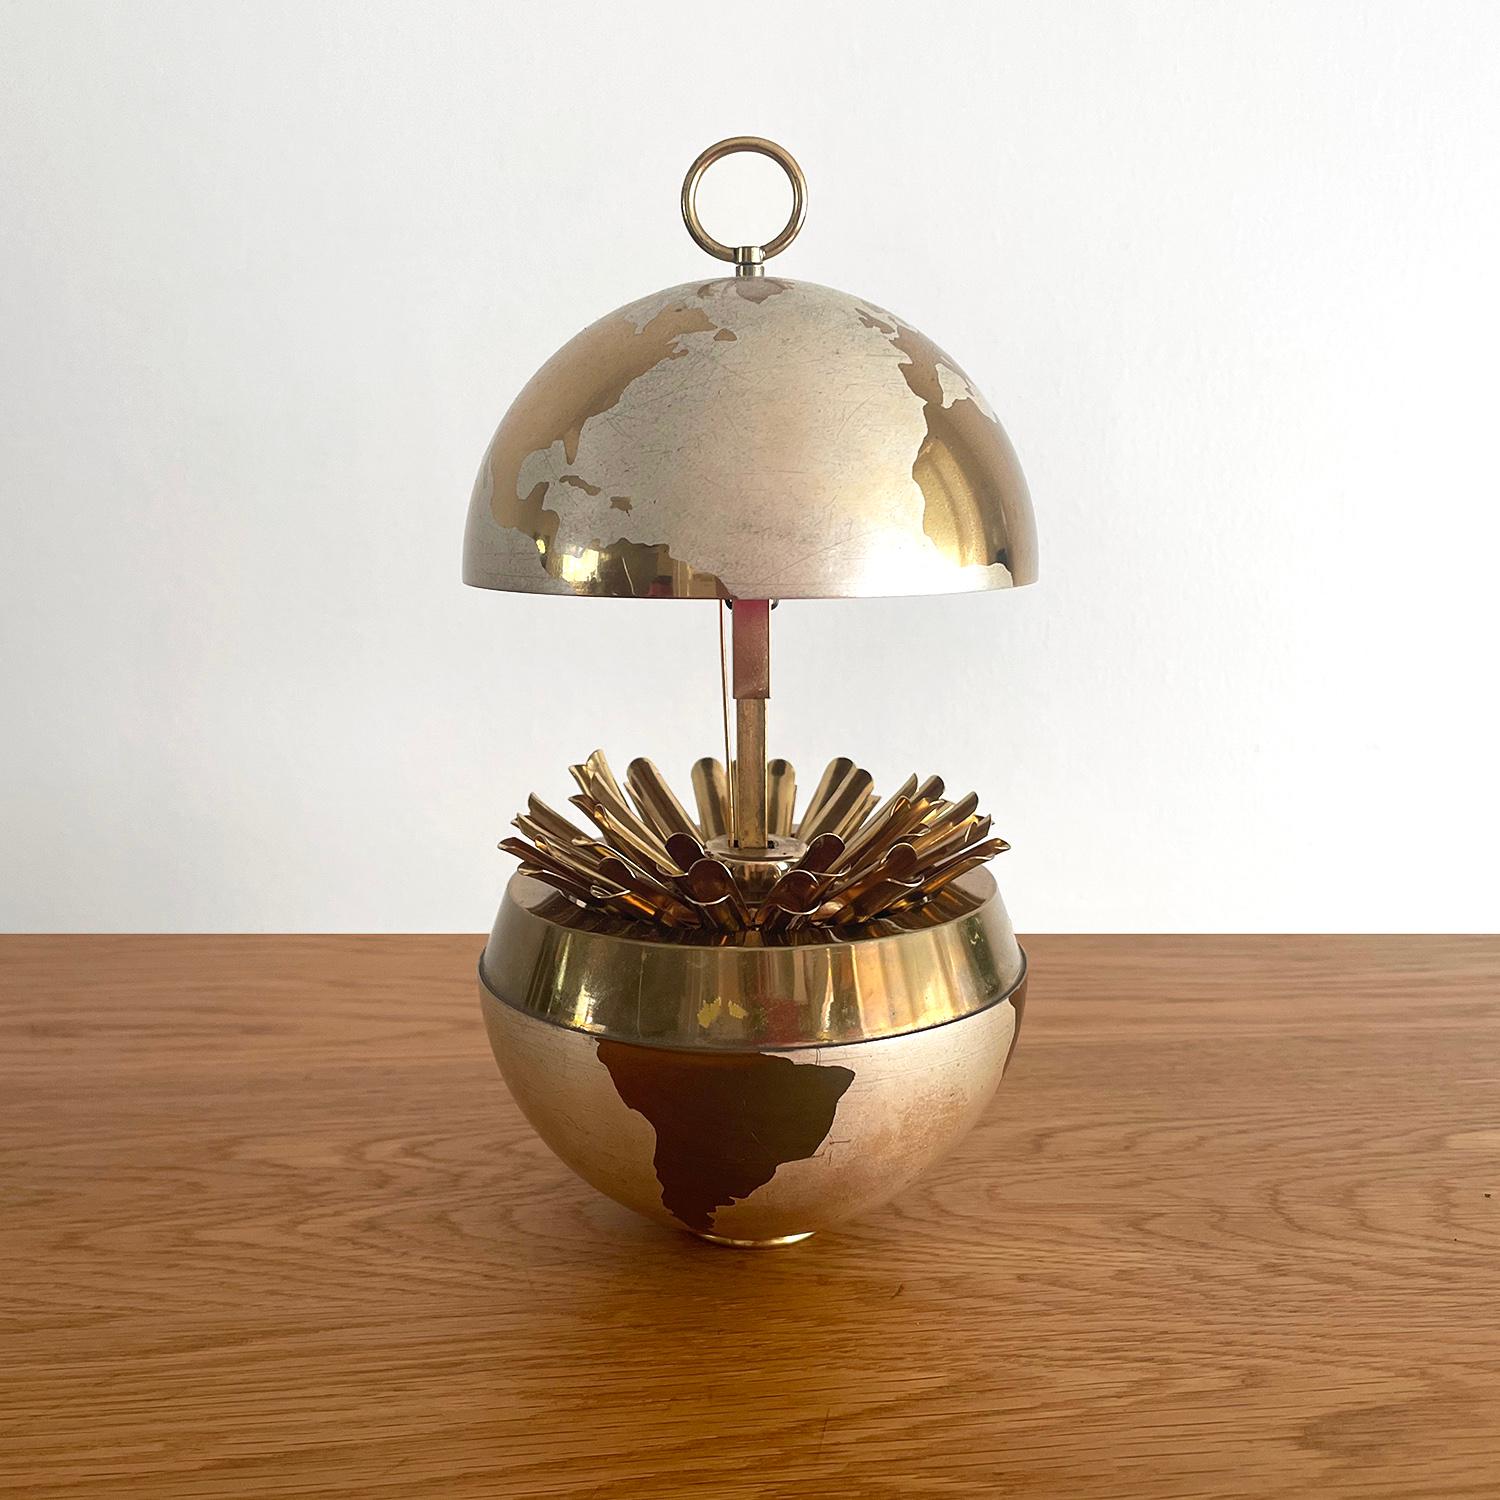 Both functional and fun!
This timeless classic will brighten any surface 
Brass toned globe opens to reveal a hidden pop up cigarette compartment
or leave it shut and it doubles as a stunning piece of art
Pop up mechanism works smoothly
Light